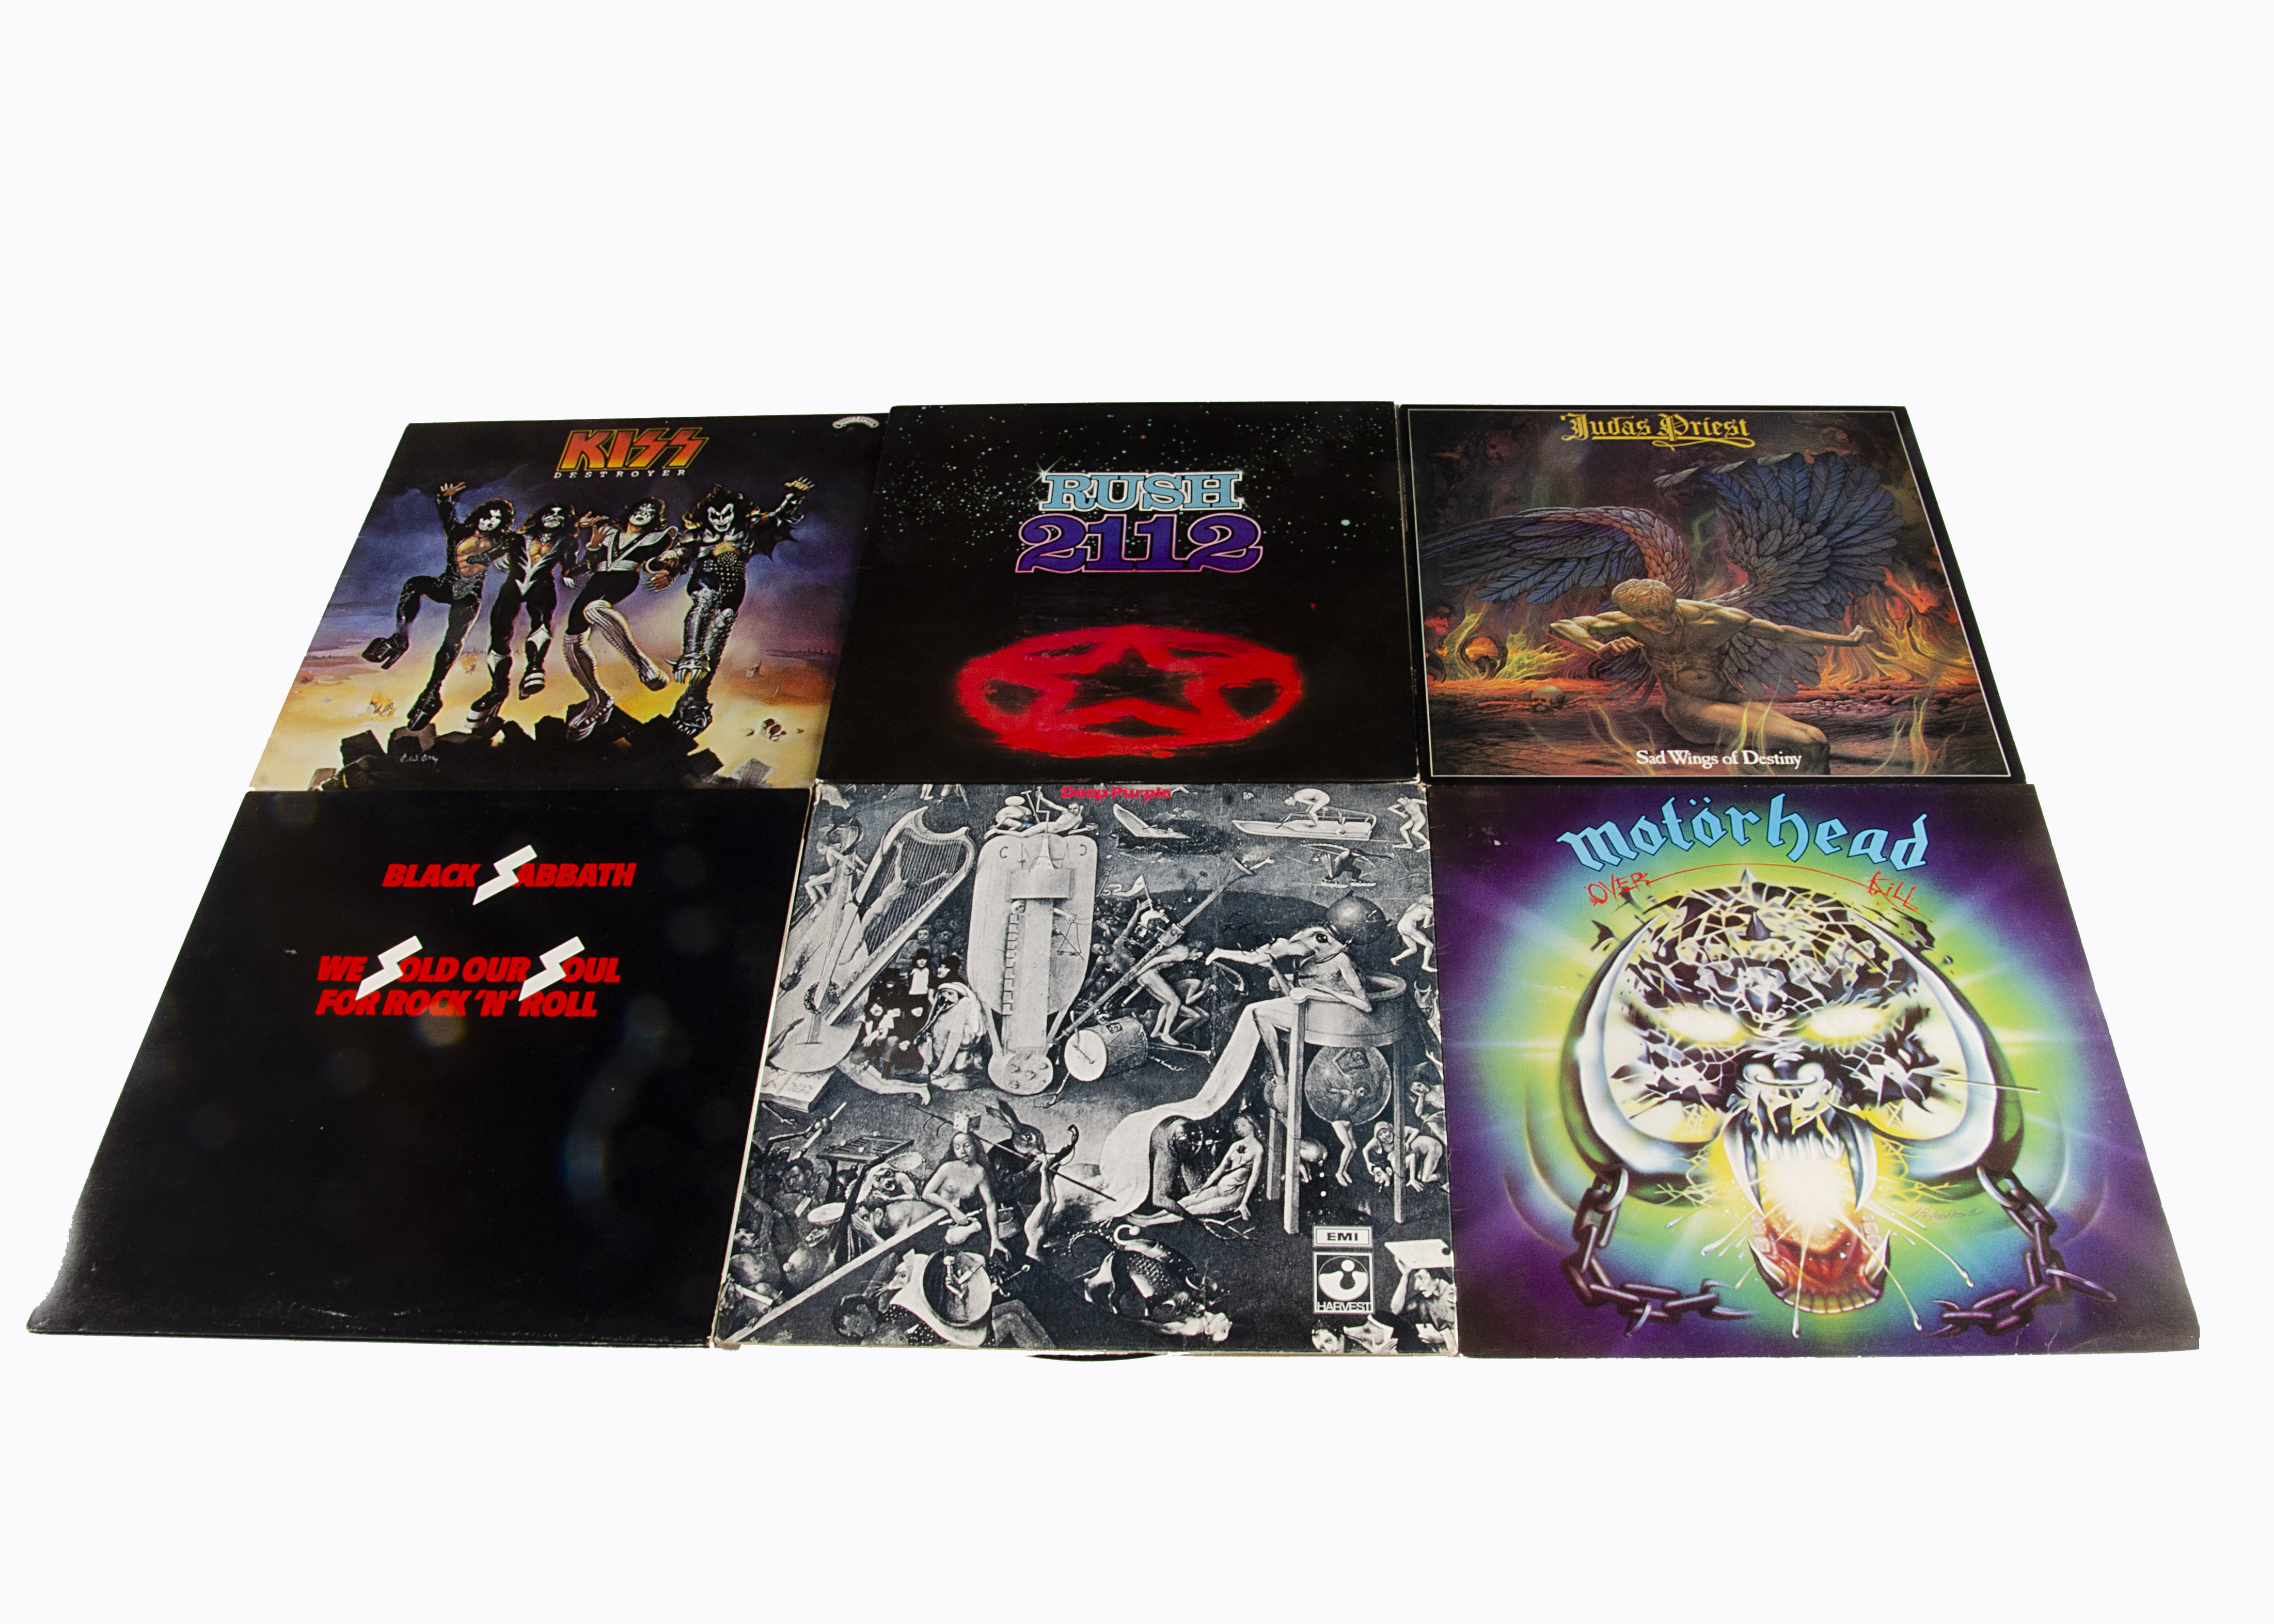 Rock / Prog LPs, fifteen albums of mainly Classic Rock and Prog with artists comprising Black